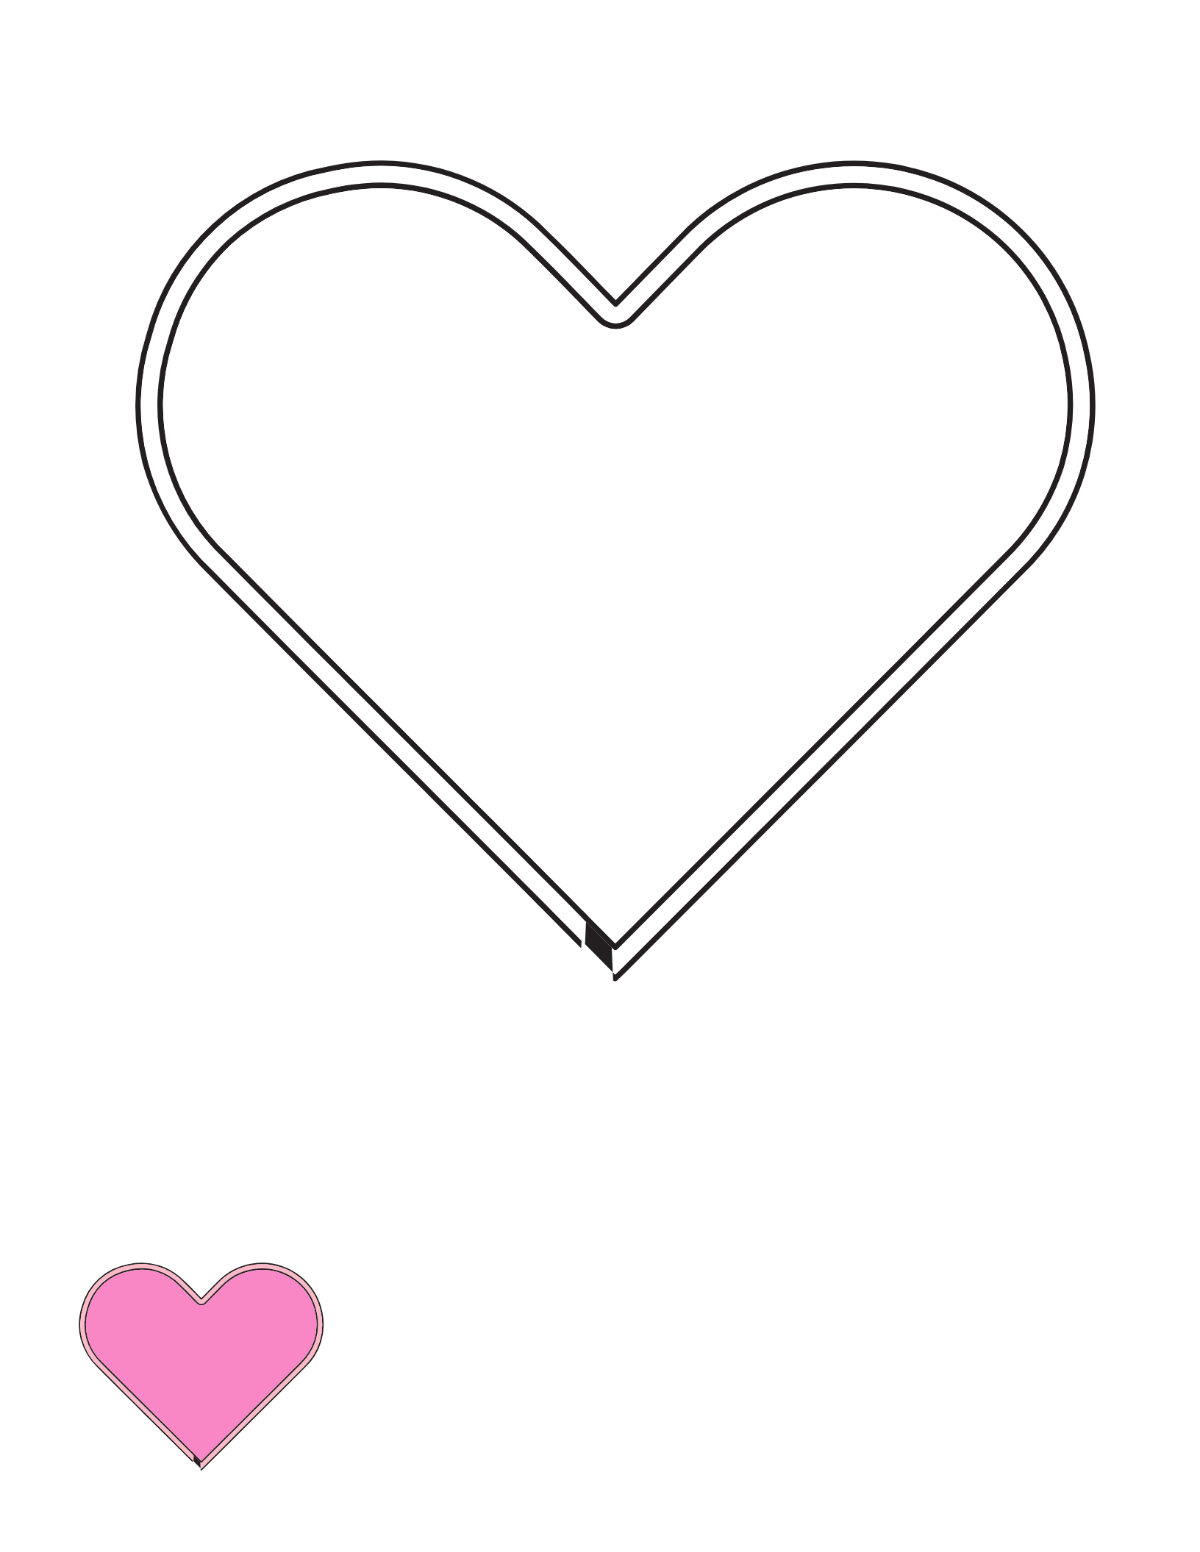 Simple Heart Outline Coloring Page Template